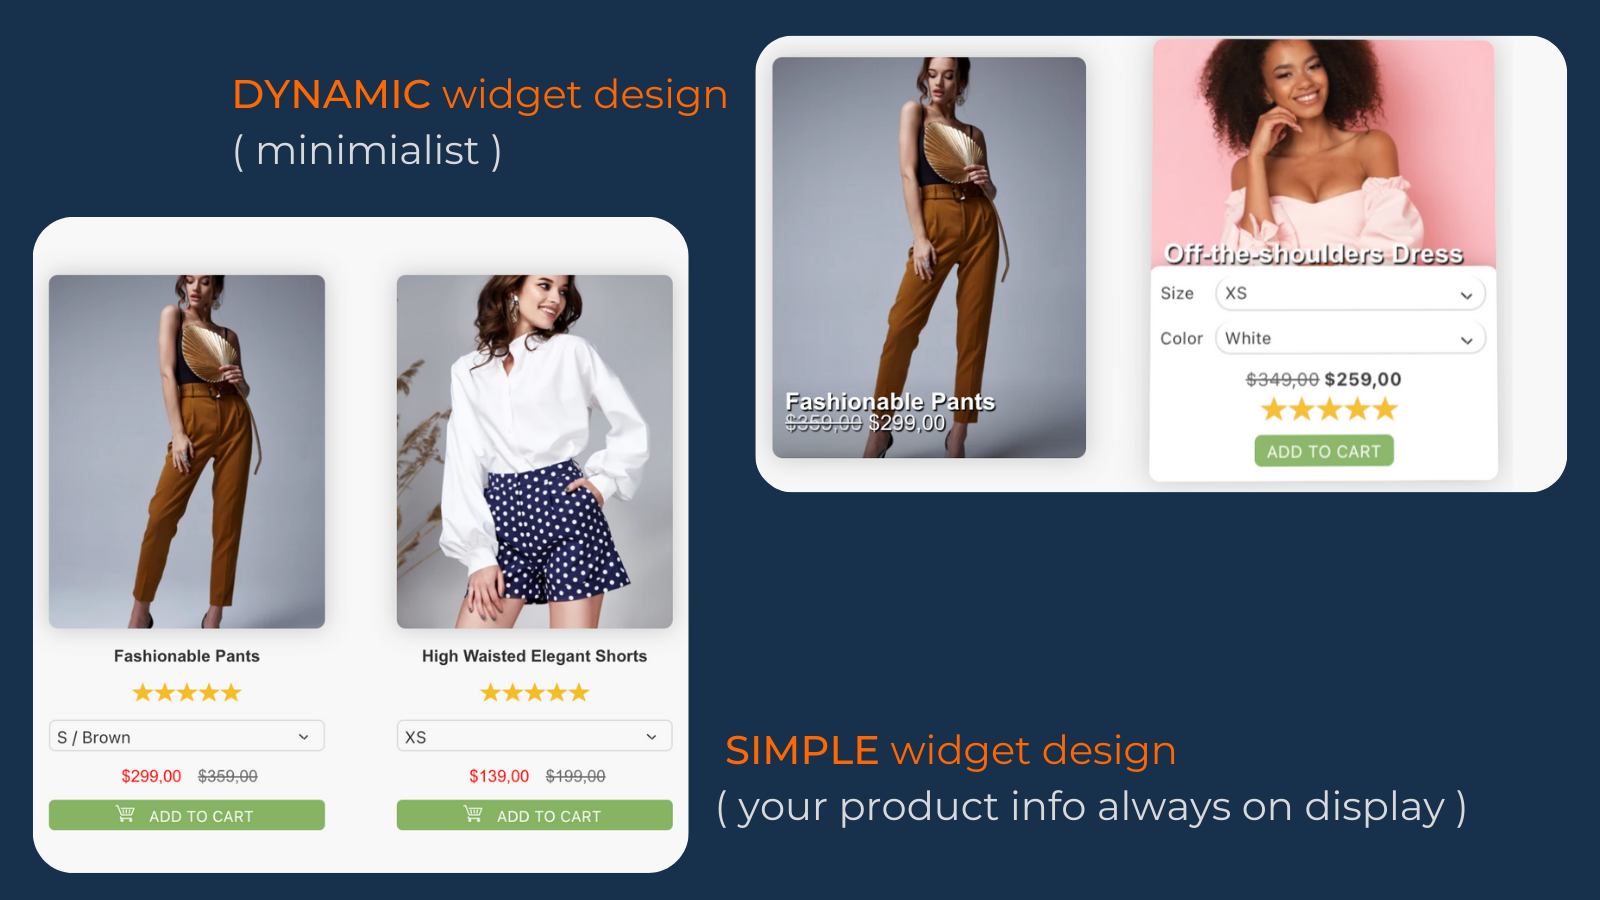 Widget variants, Price, compare at price, Add to cart, Review